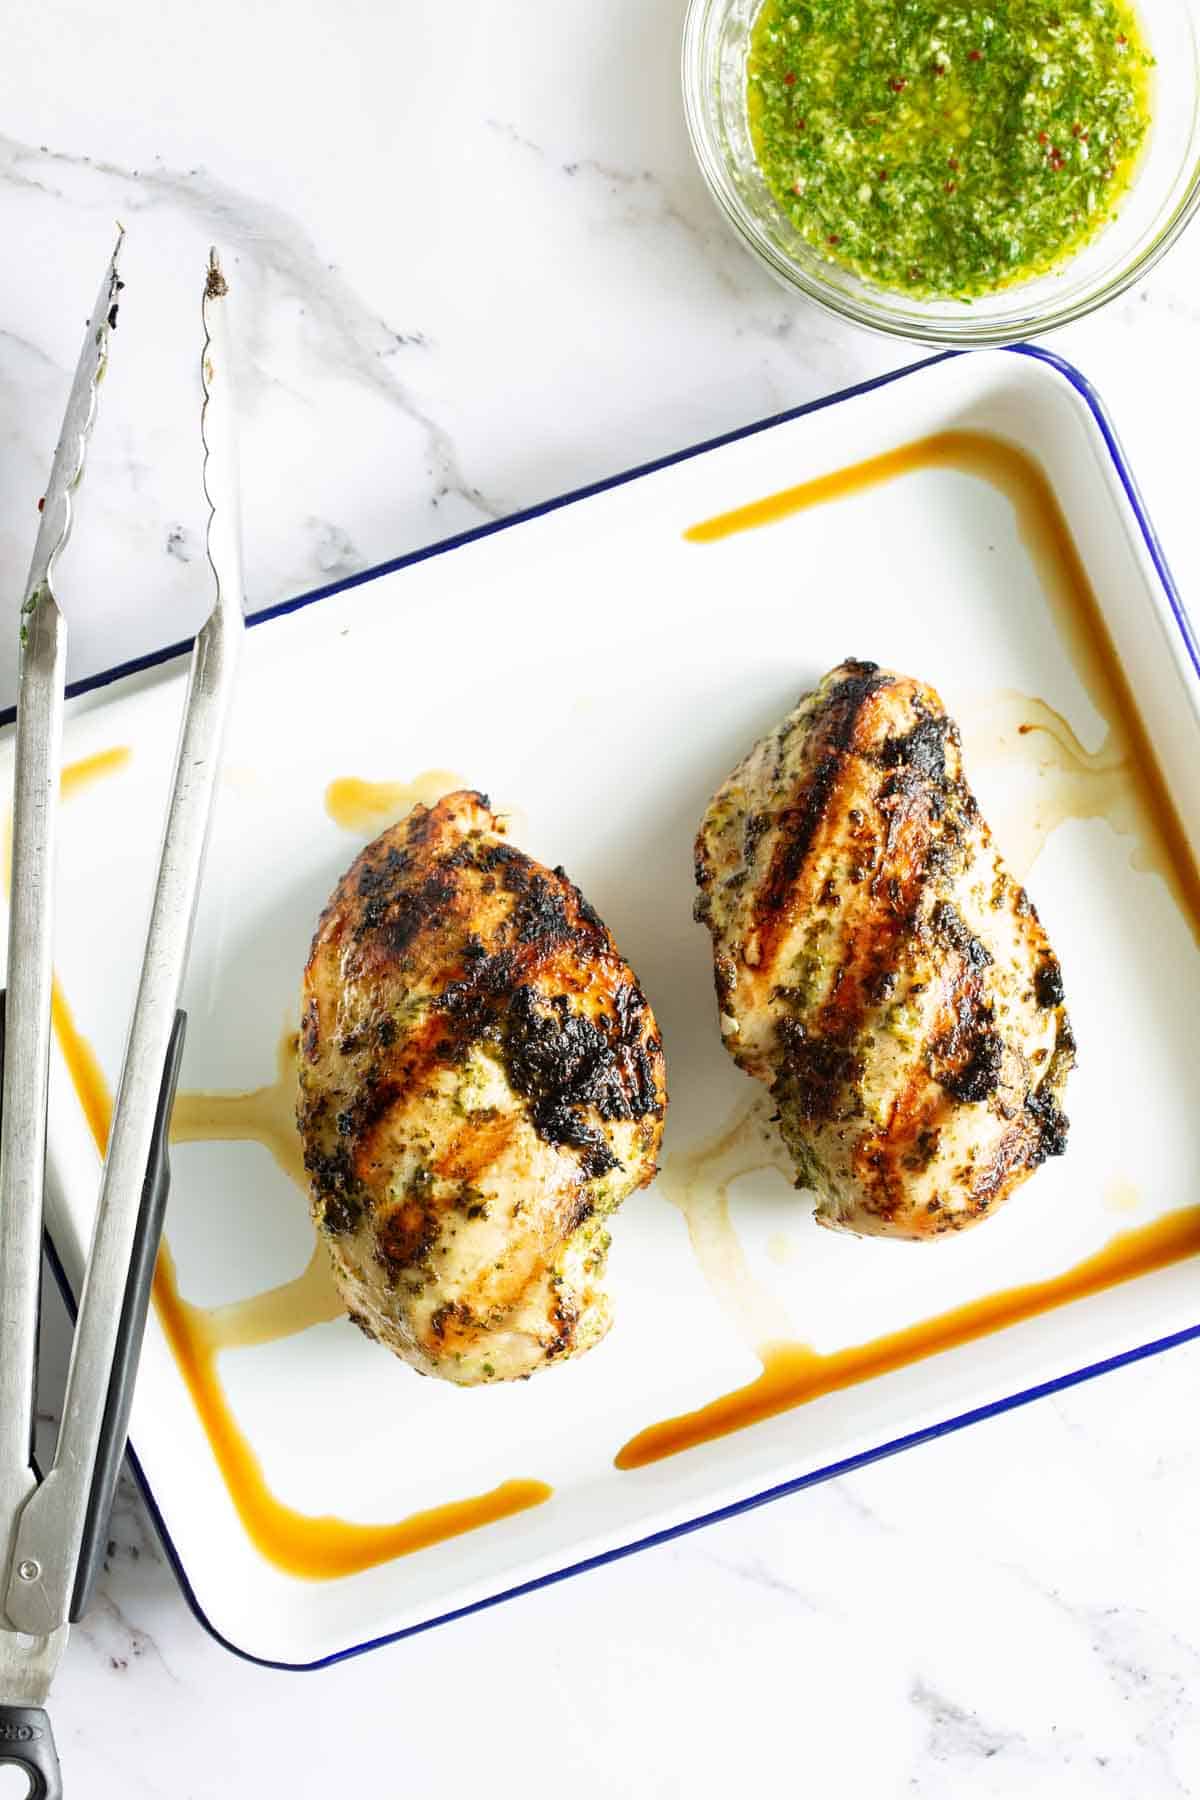 Two grilled chicken breasts on a white rectangular plate with tongs. A bowl of green sauce is placed nearby.